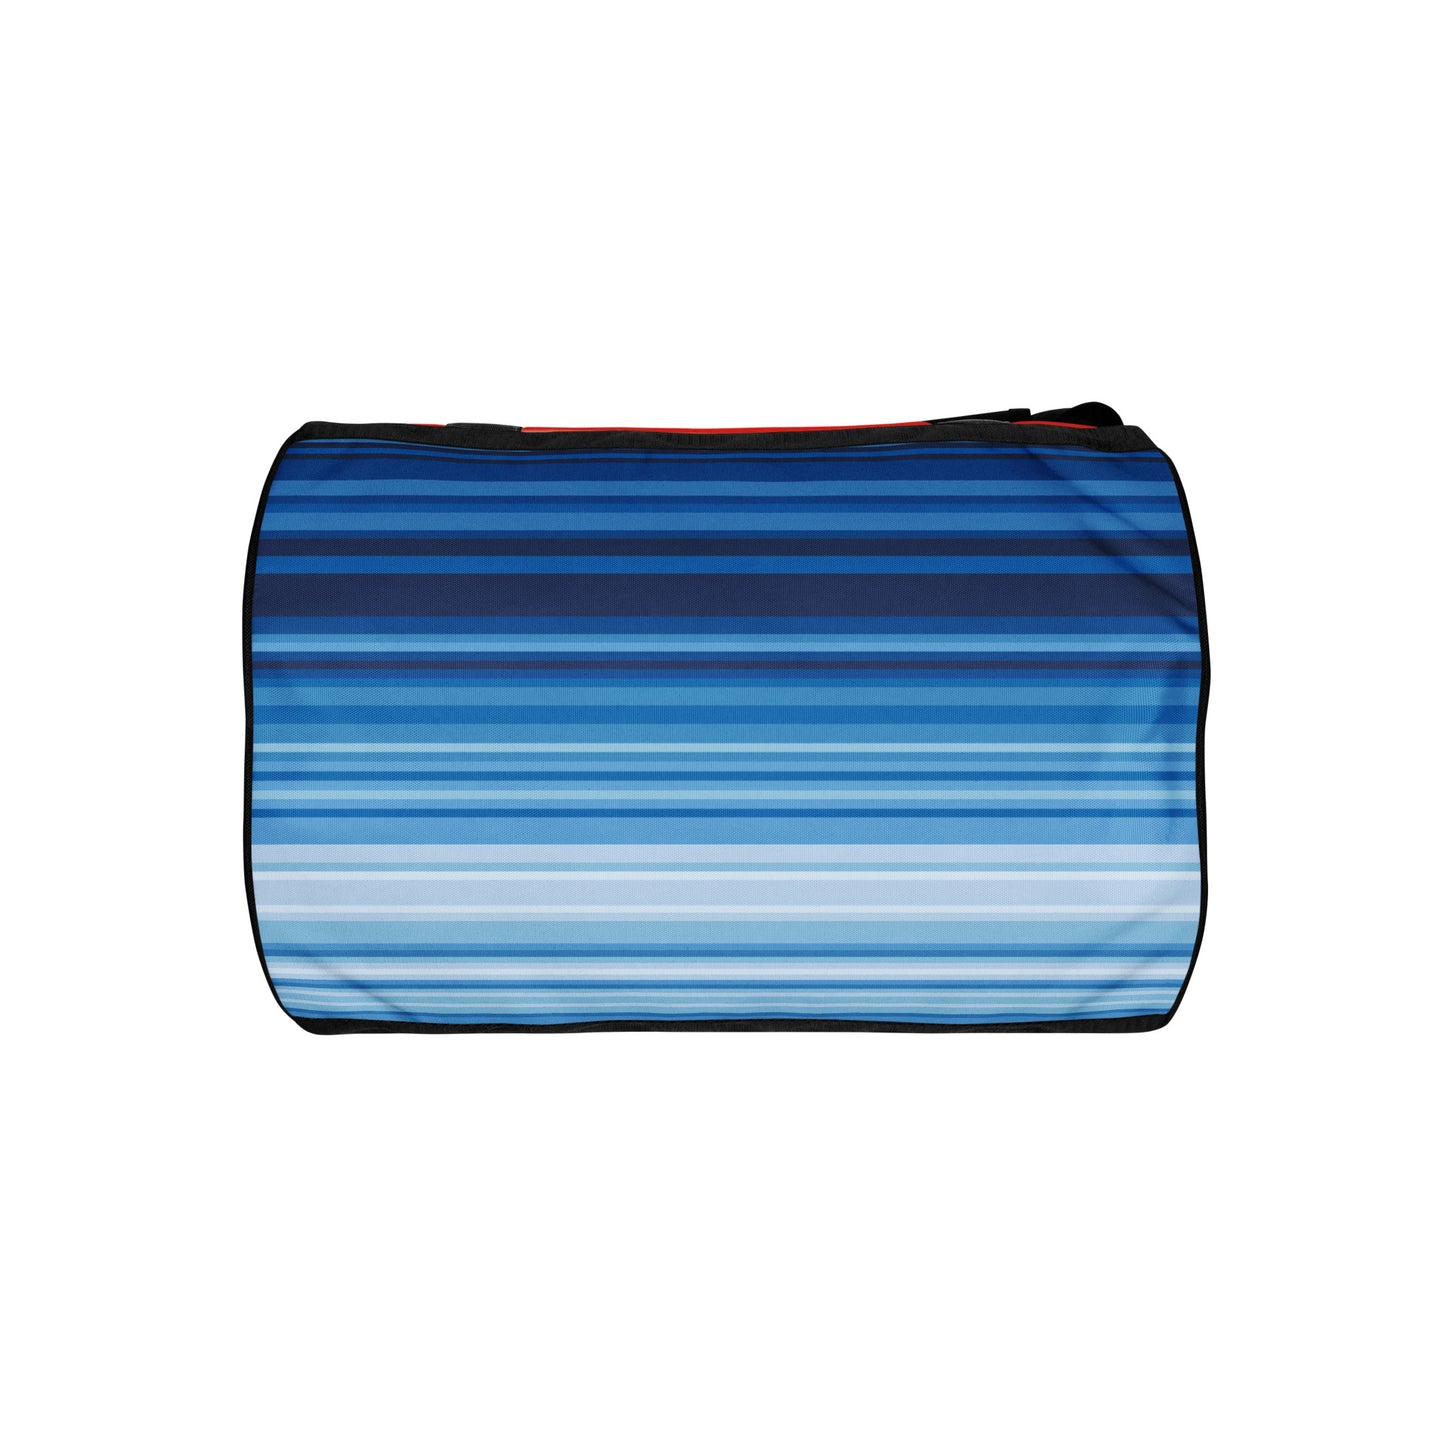 Climate Change Global Warming Stripes - Sustainably Made gym bag